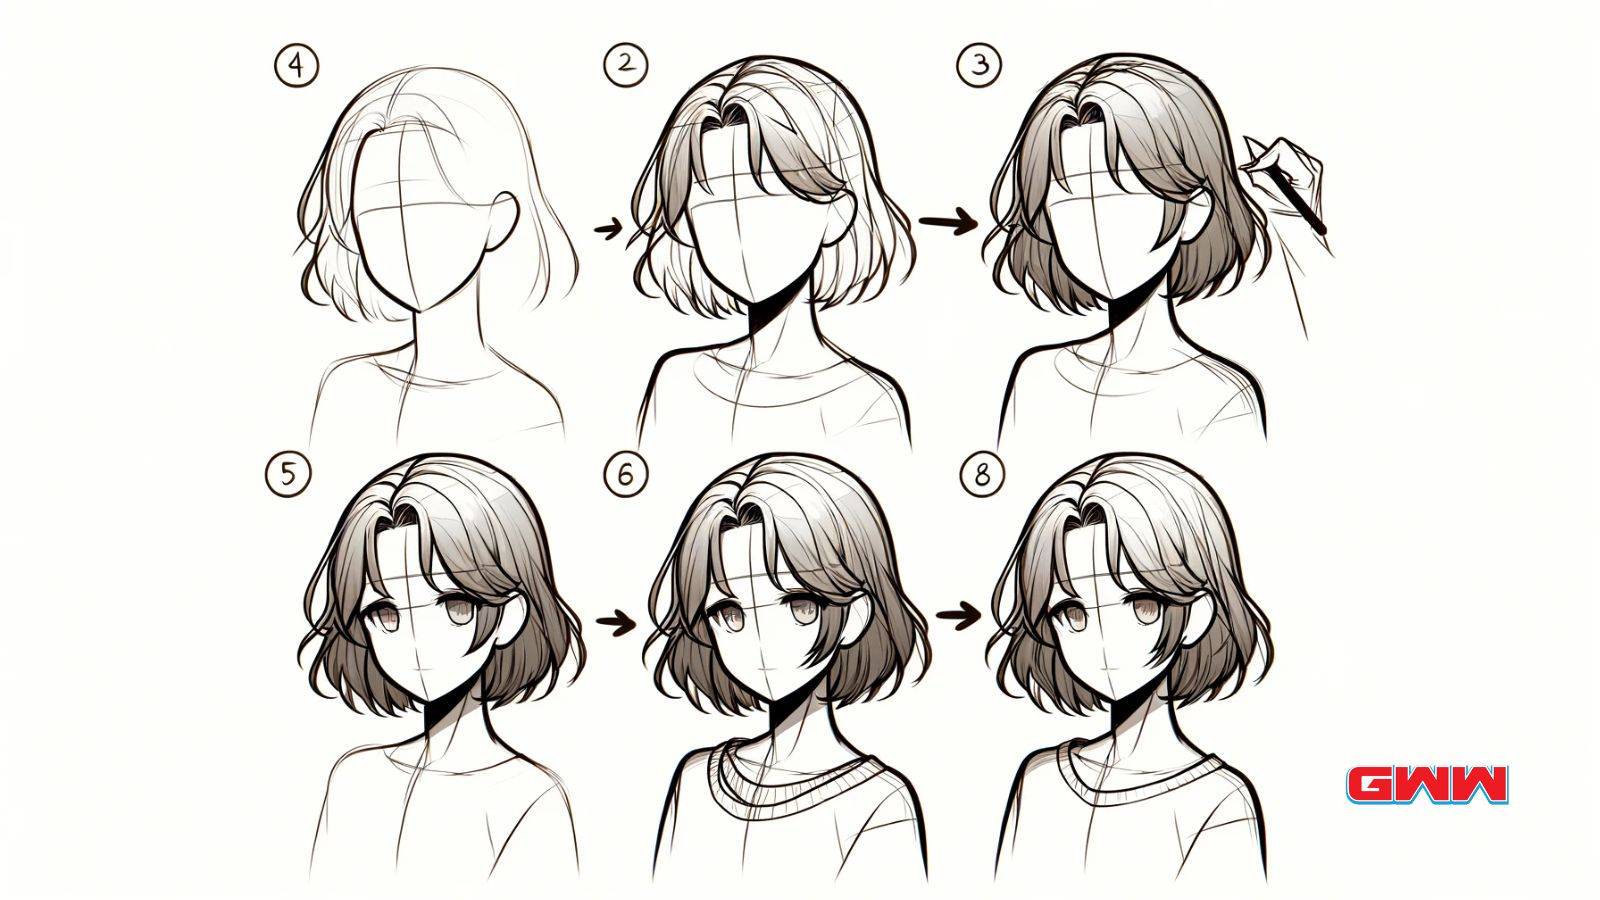 Beginner-friendly anime girl hair drawing step-by-step process